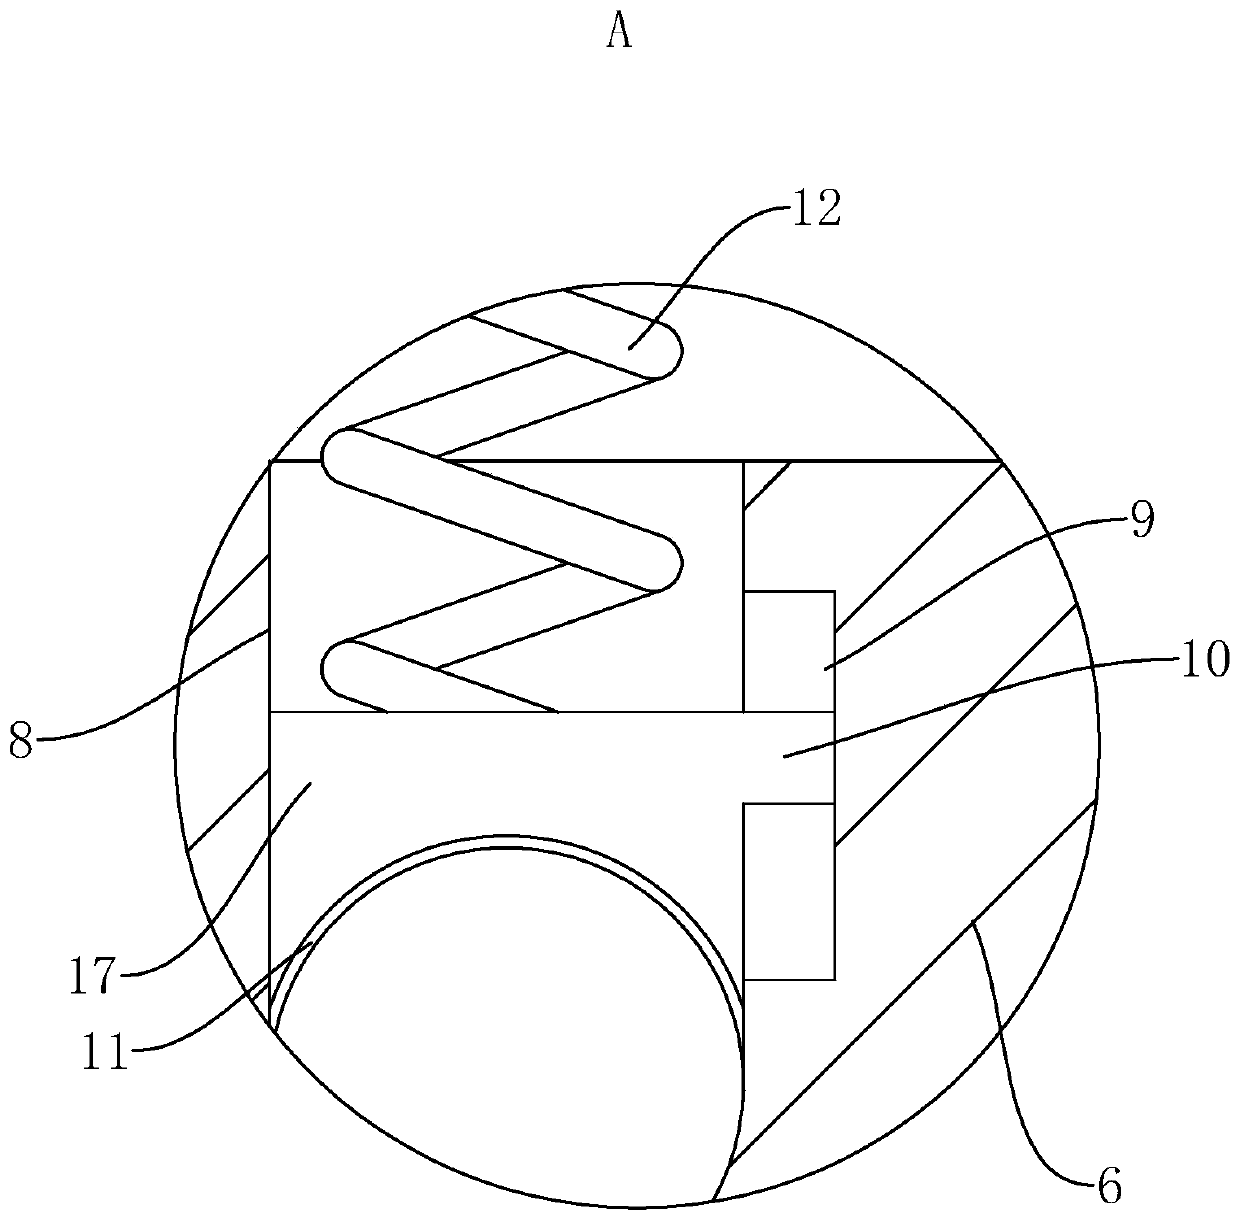 Glass pedal connecting device and its installation method